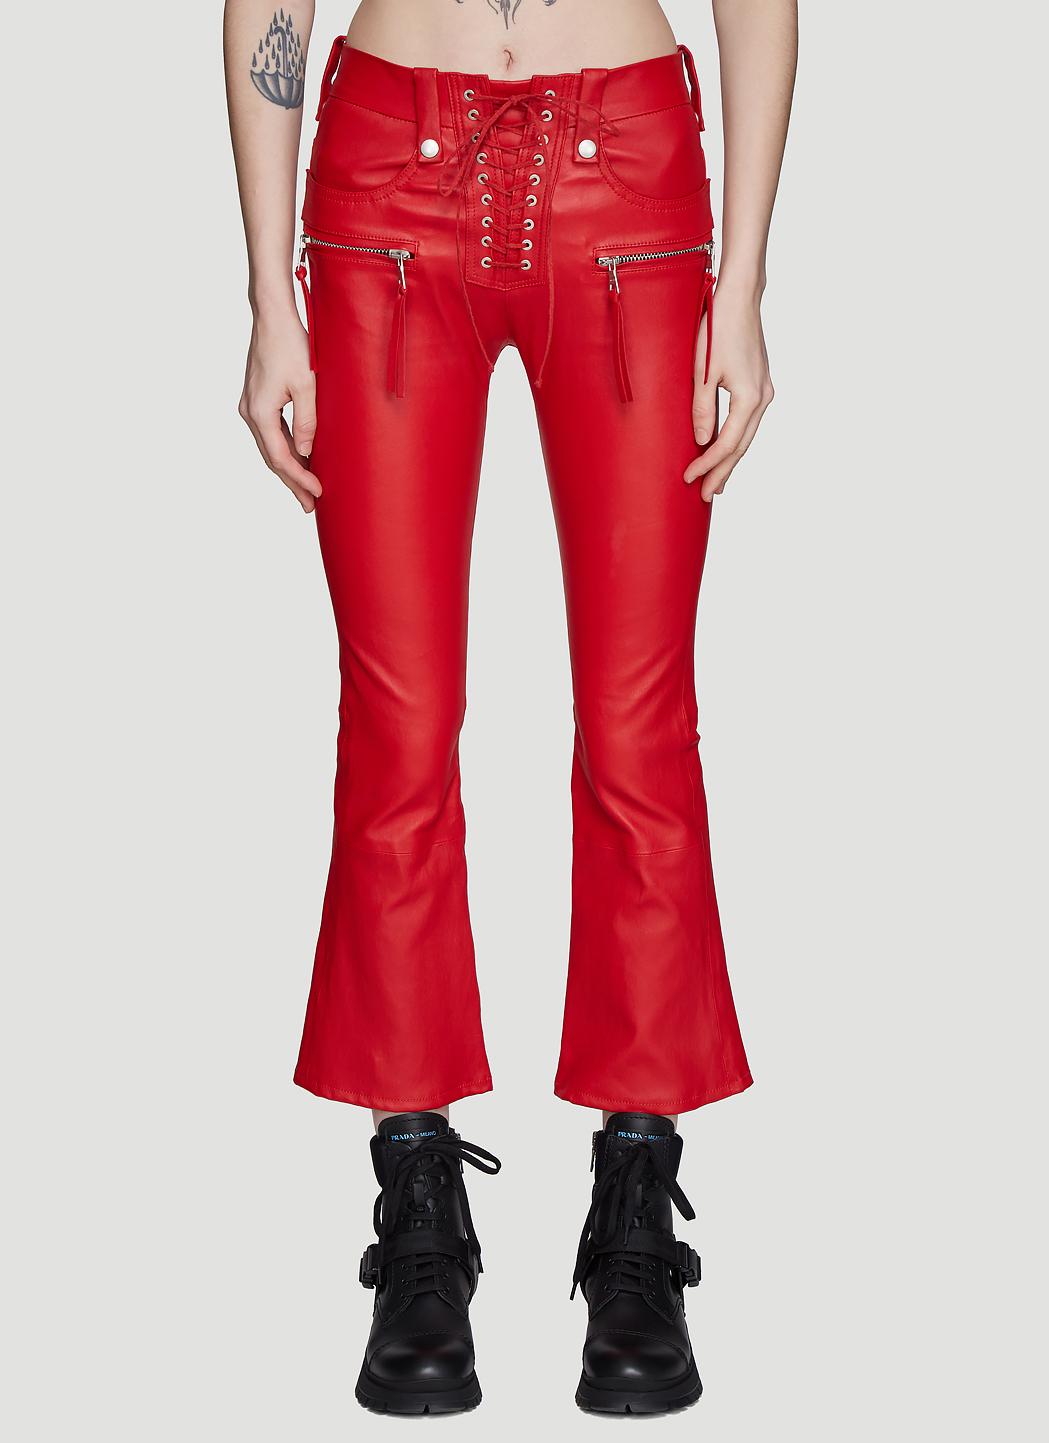 Unravel Project Lace-up Flared Leather Pants In Red - Lyst